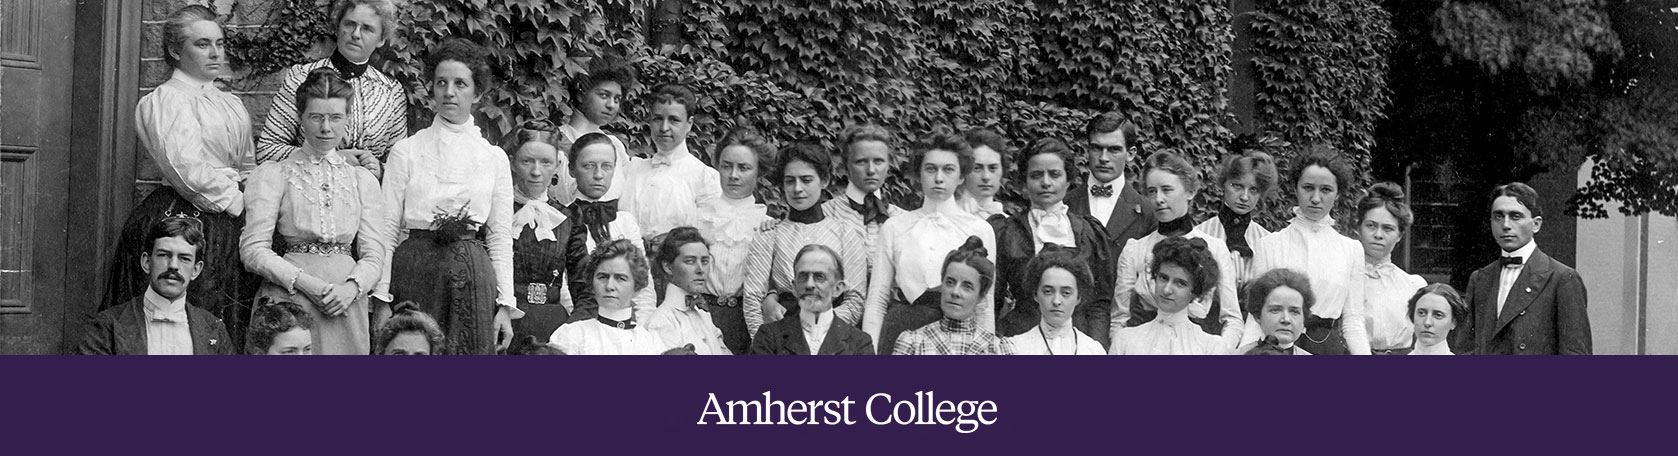 Black and white group portrait of librarians at Amherst College in 1900 including Belle da Costa Greene.